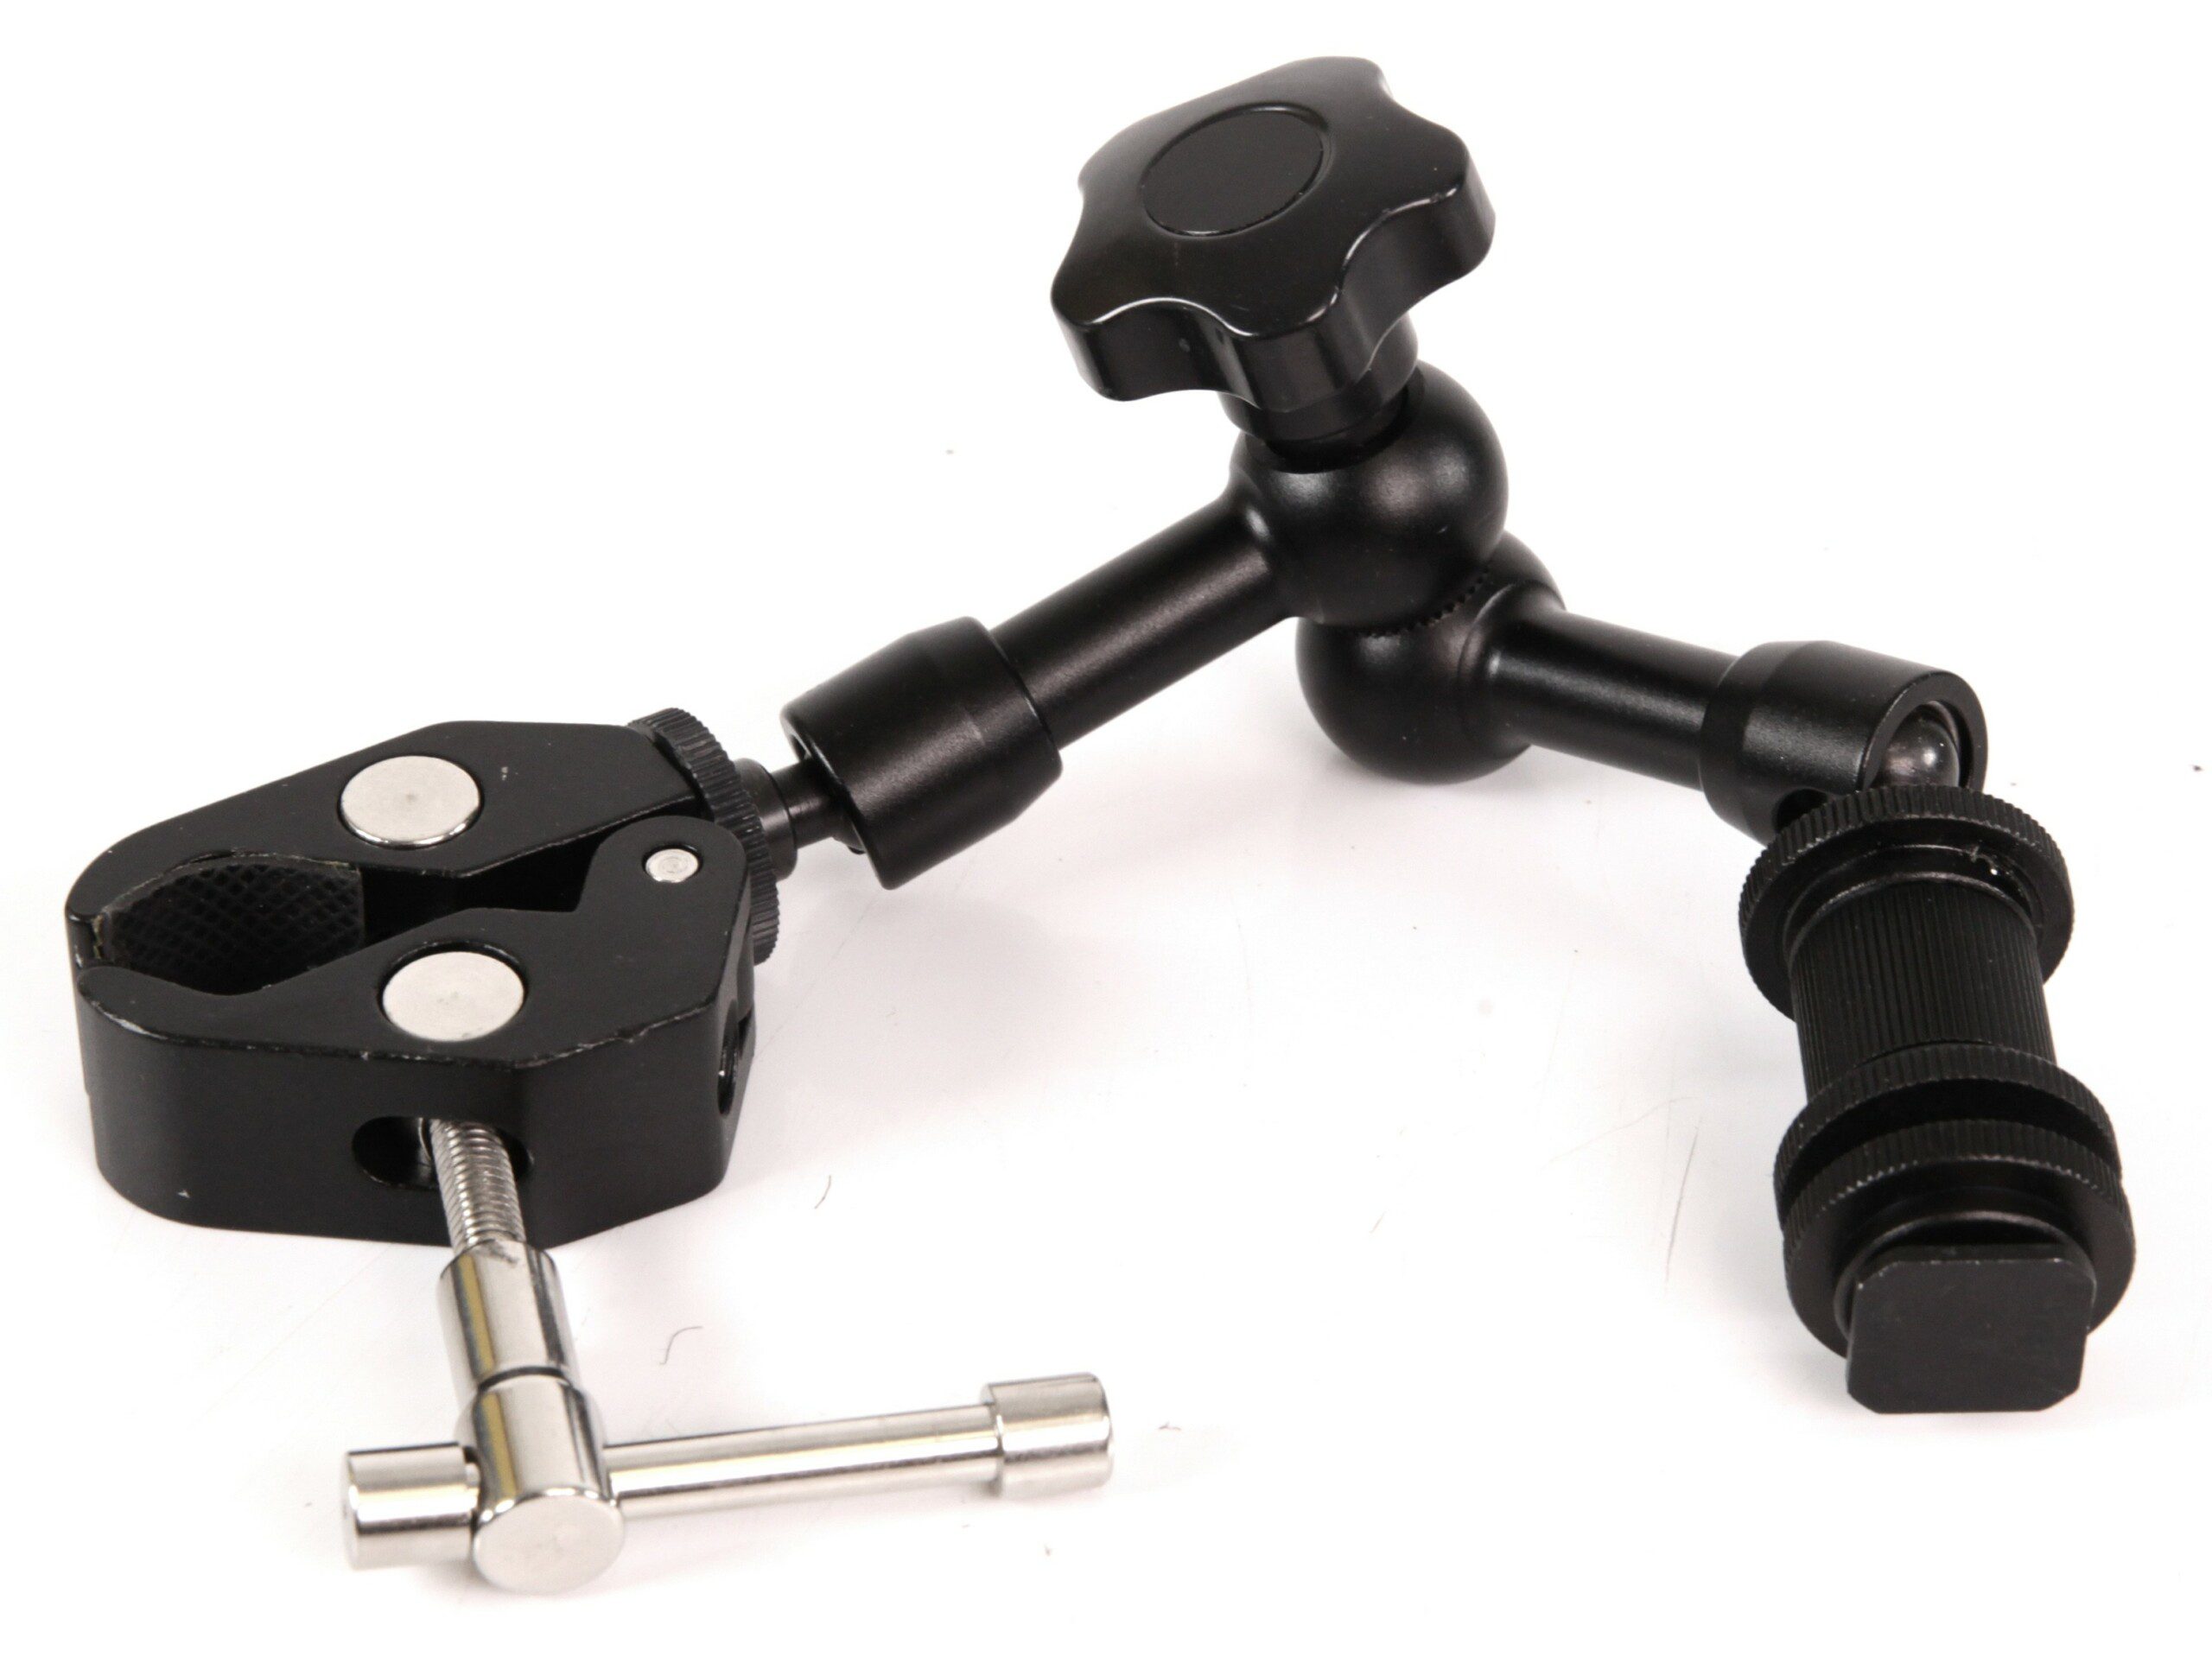 7 Inch Magic Arm with Clamp